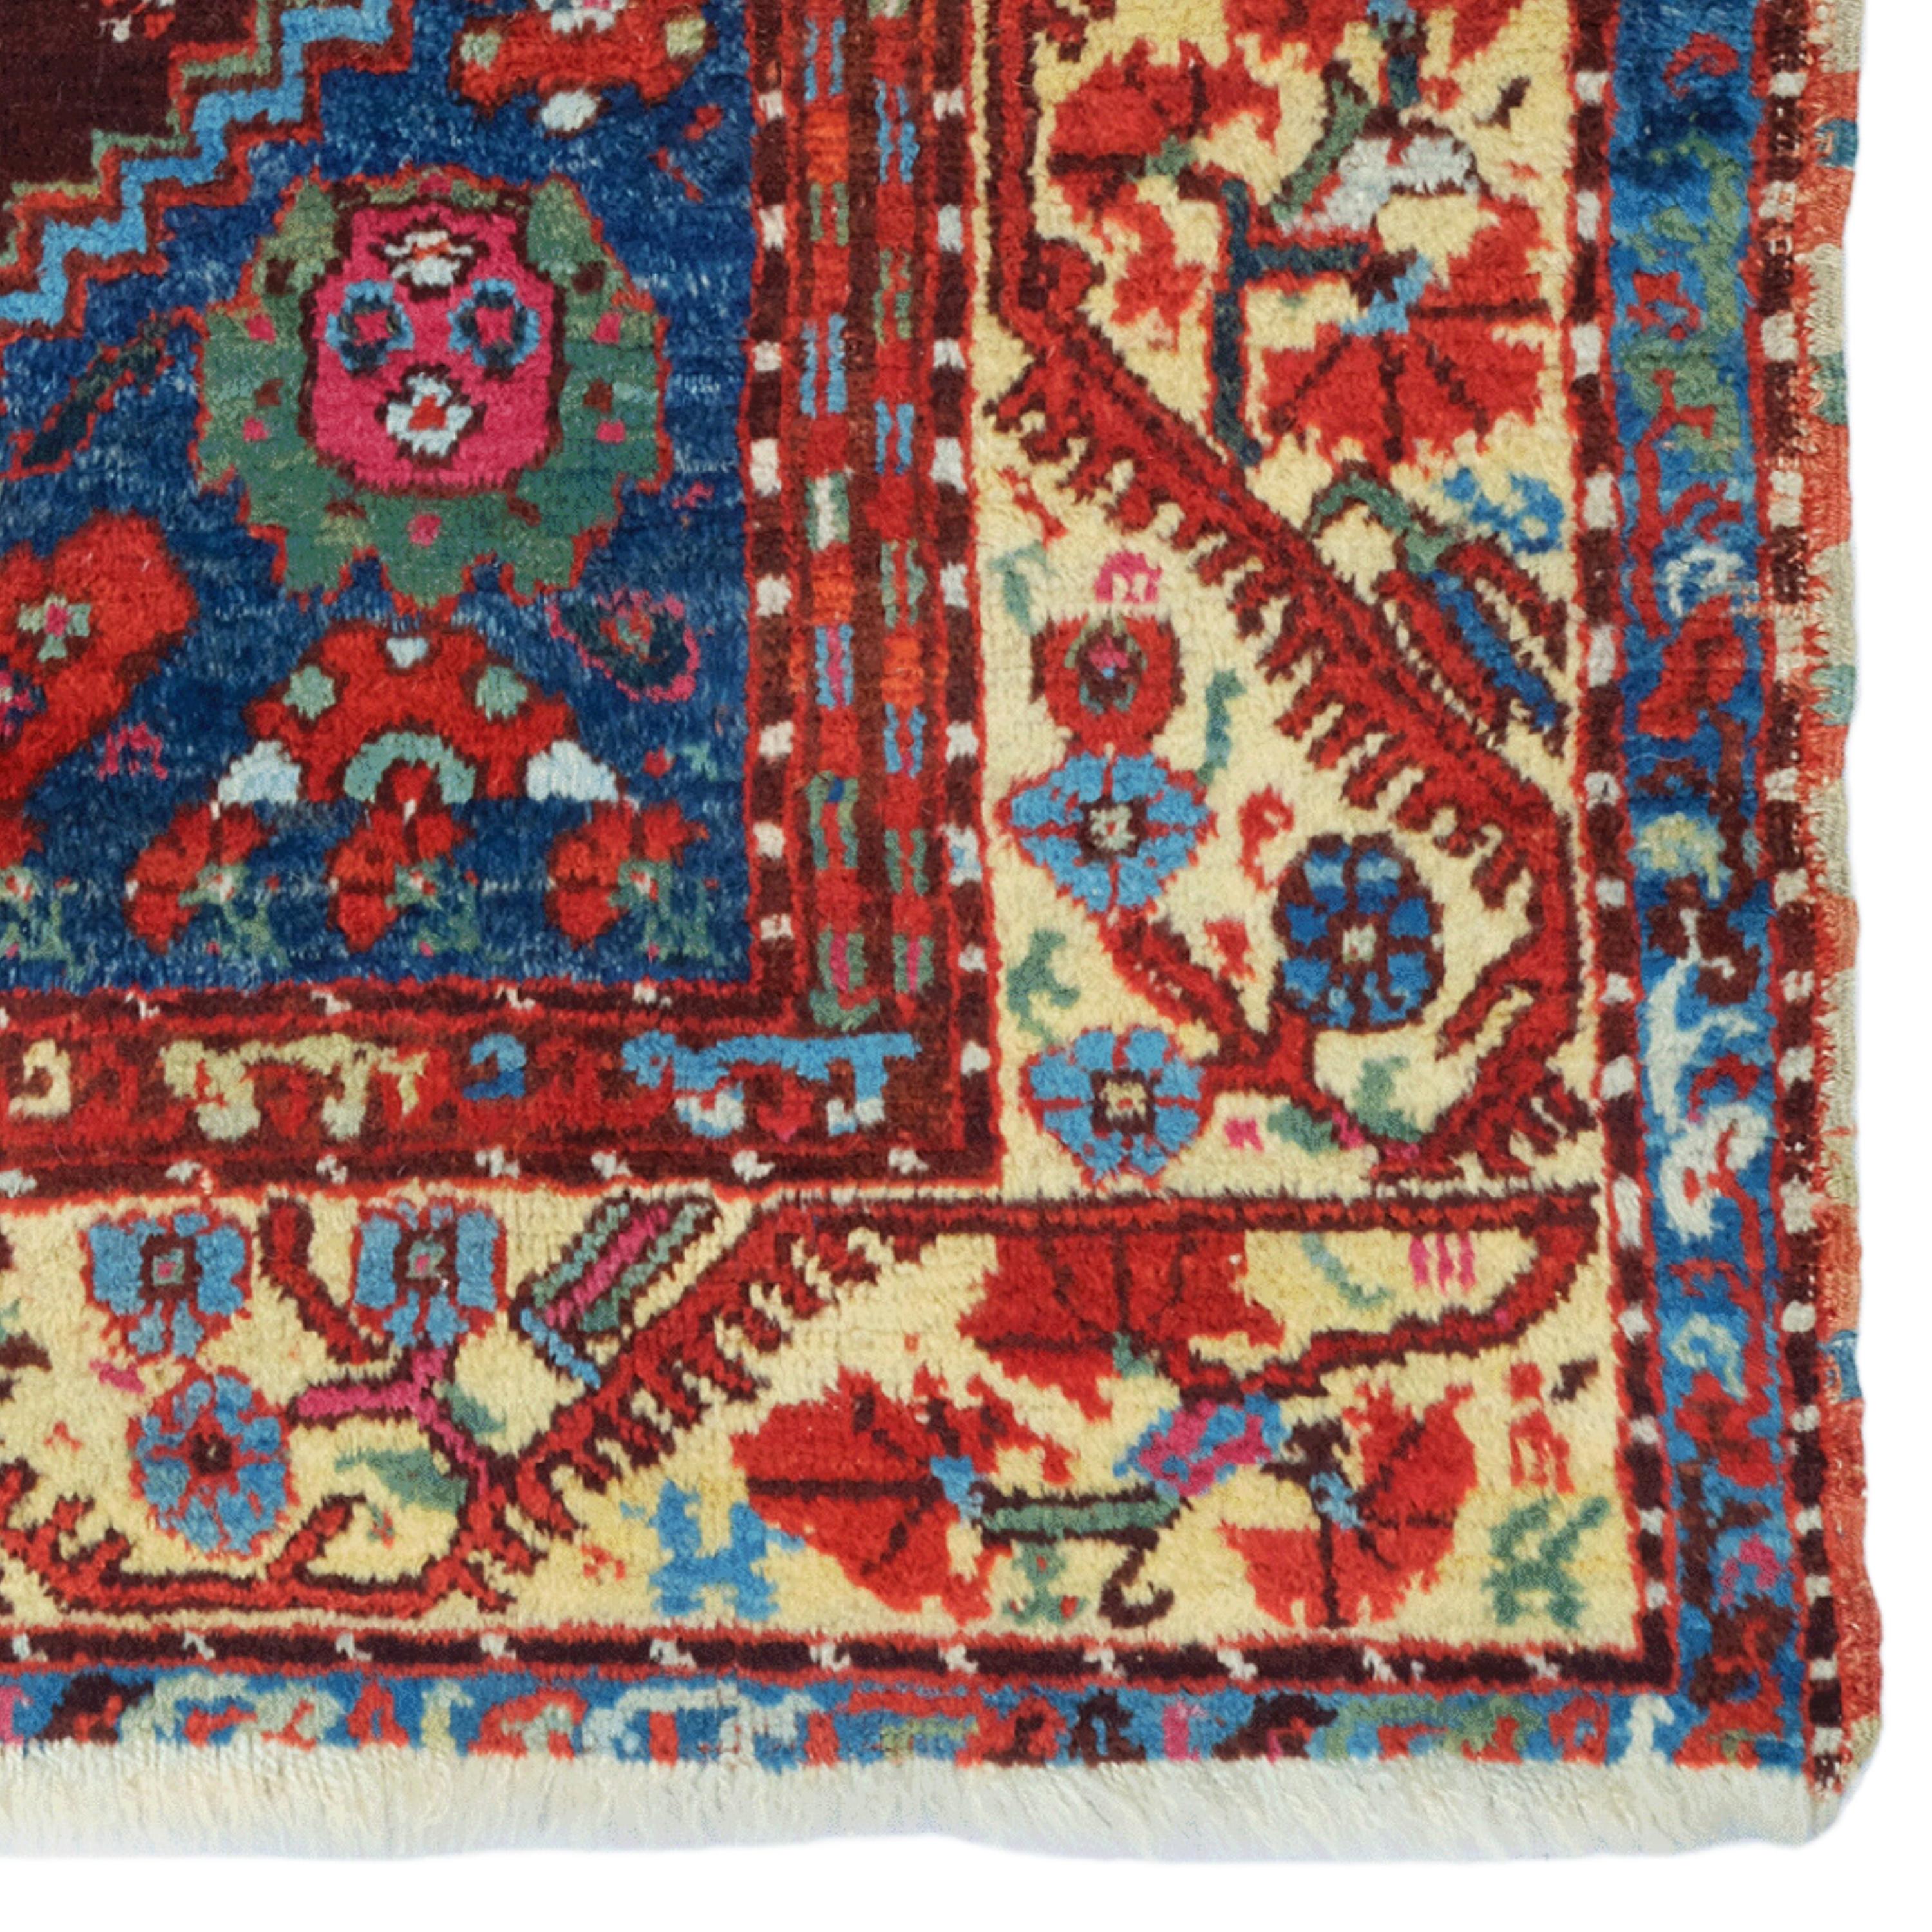 Middle Of The 19th Century Anatolian Kula Rug - Antique Turkish Rug For Sale 1